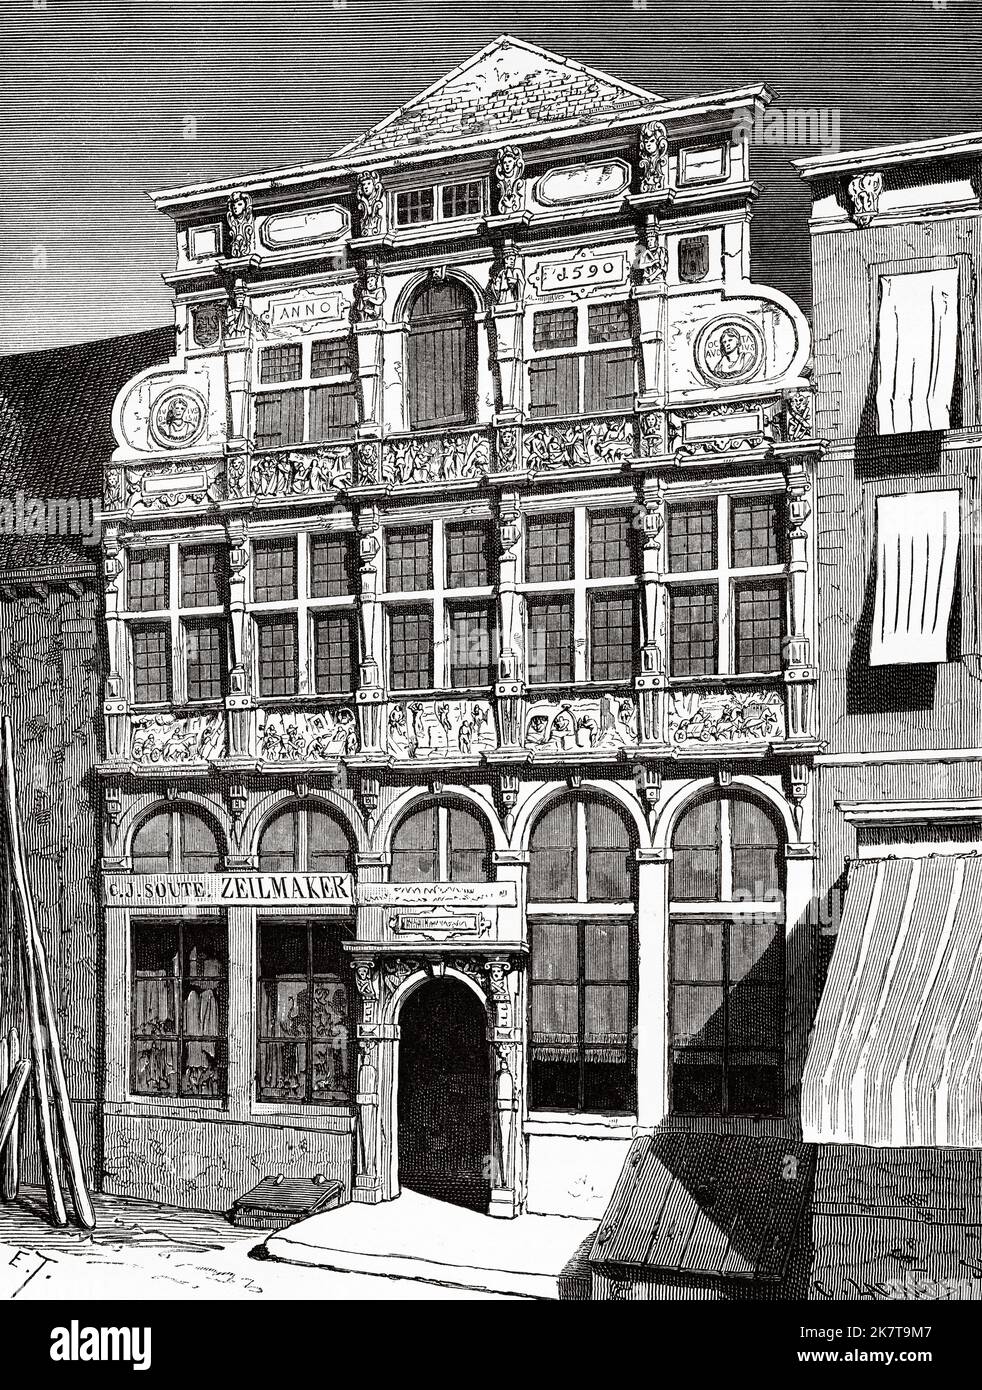 Steen-Rots. Renaissance style house, Middelburg. Netherlands, Europe. Trip to the Zeeland by Charles De Coster 1873 Stock Photo